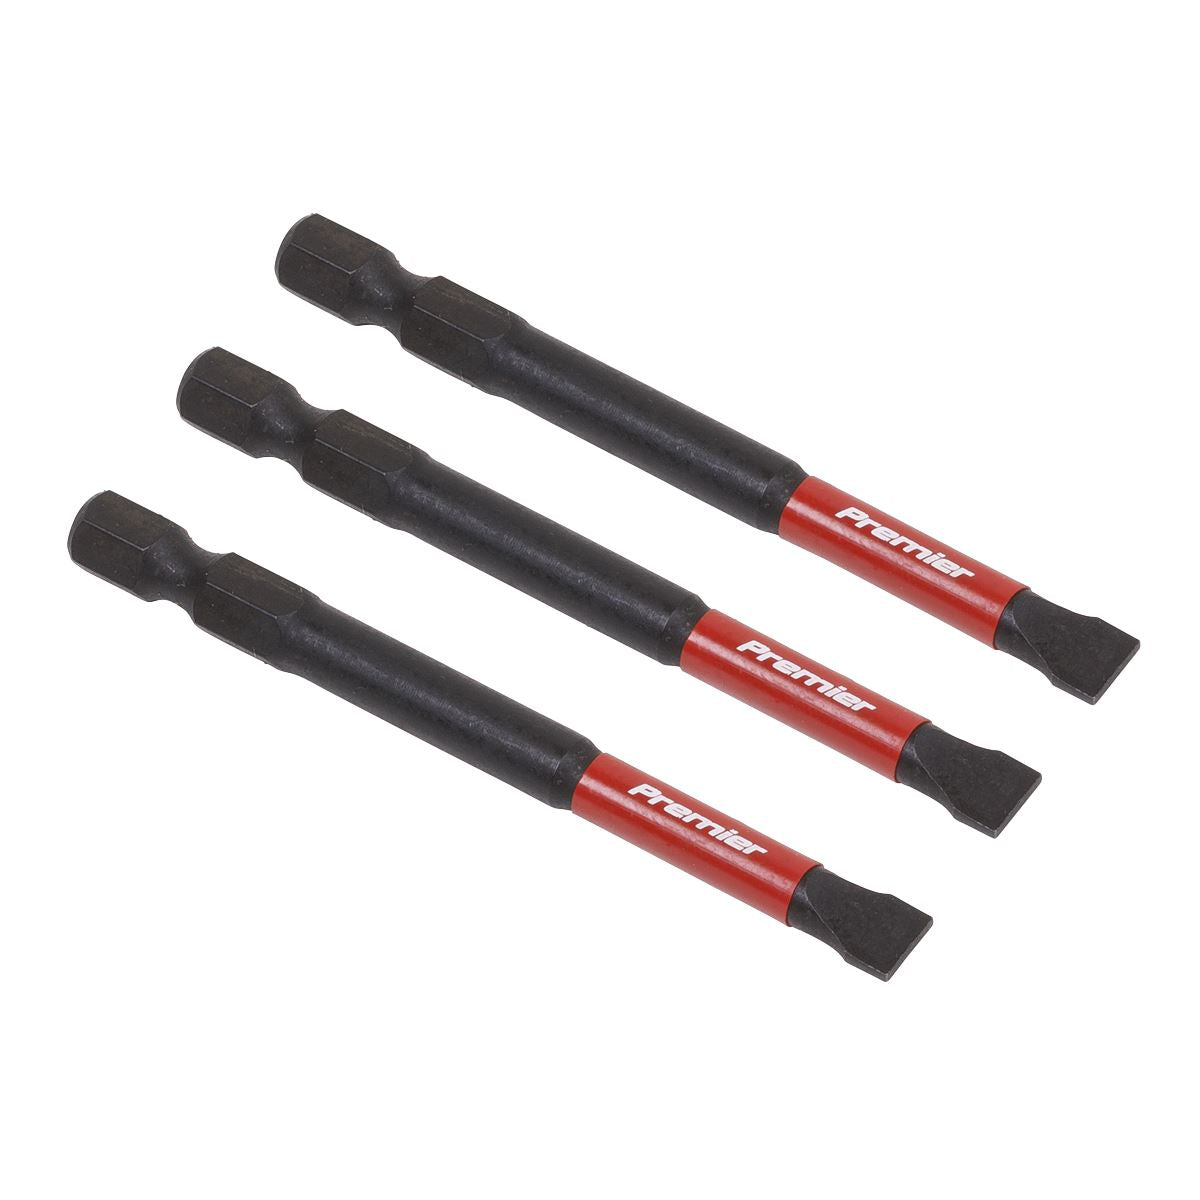 Sealey Premier Slotted 6.5mm Impact Power Tool Bits 75mm - 3pc